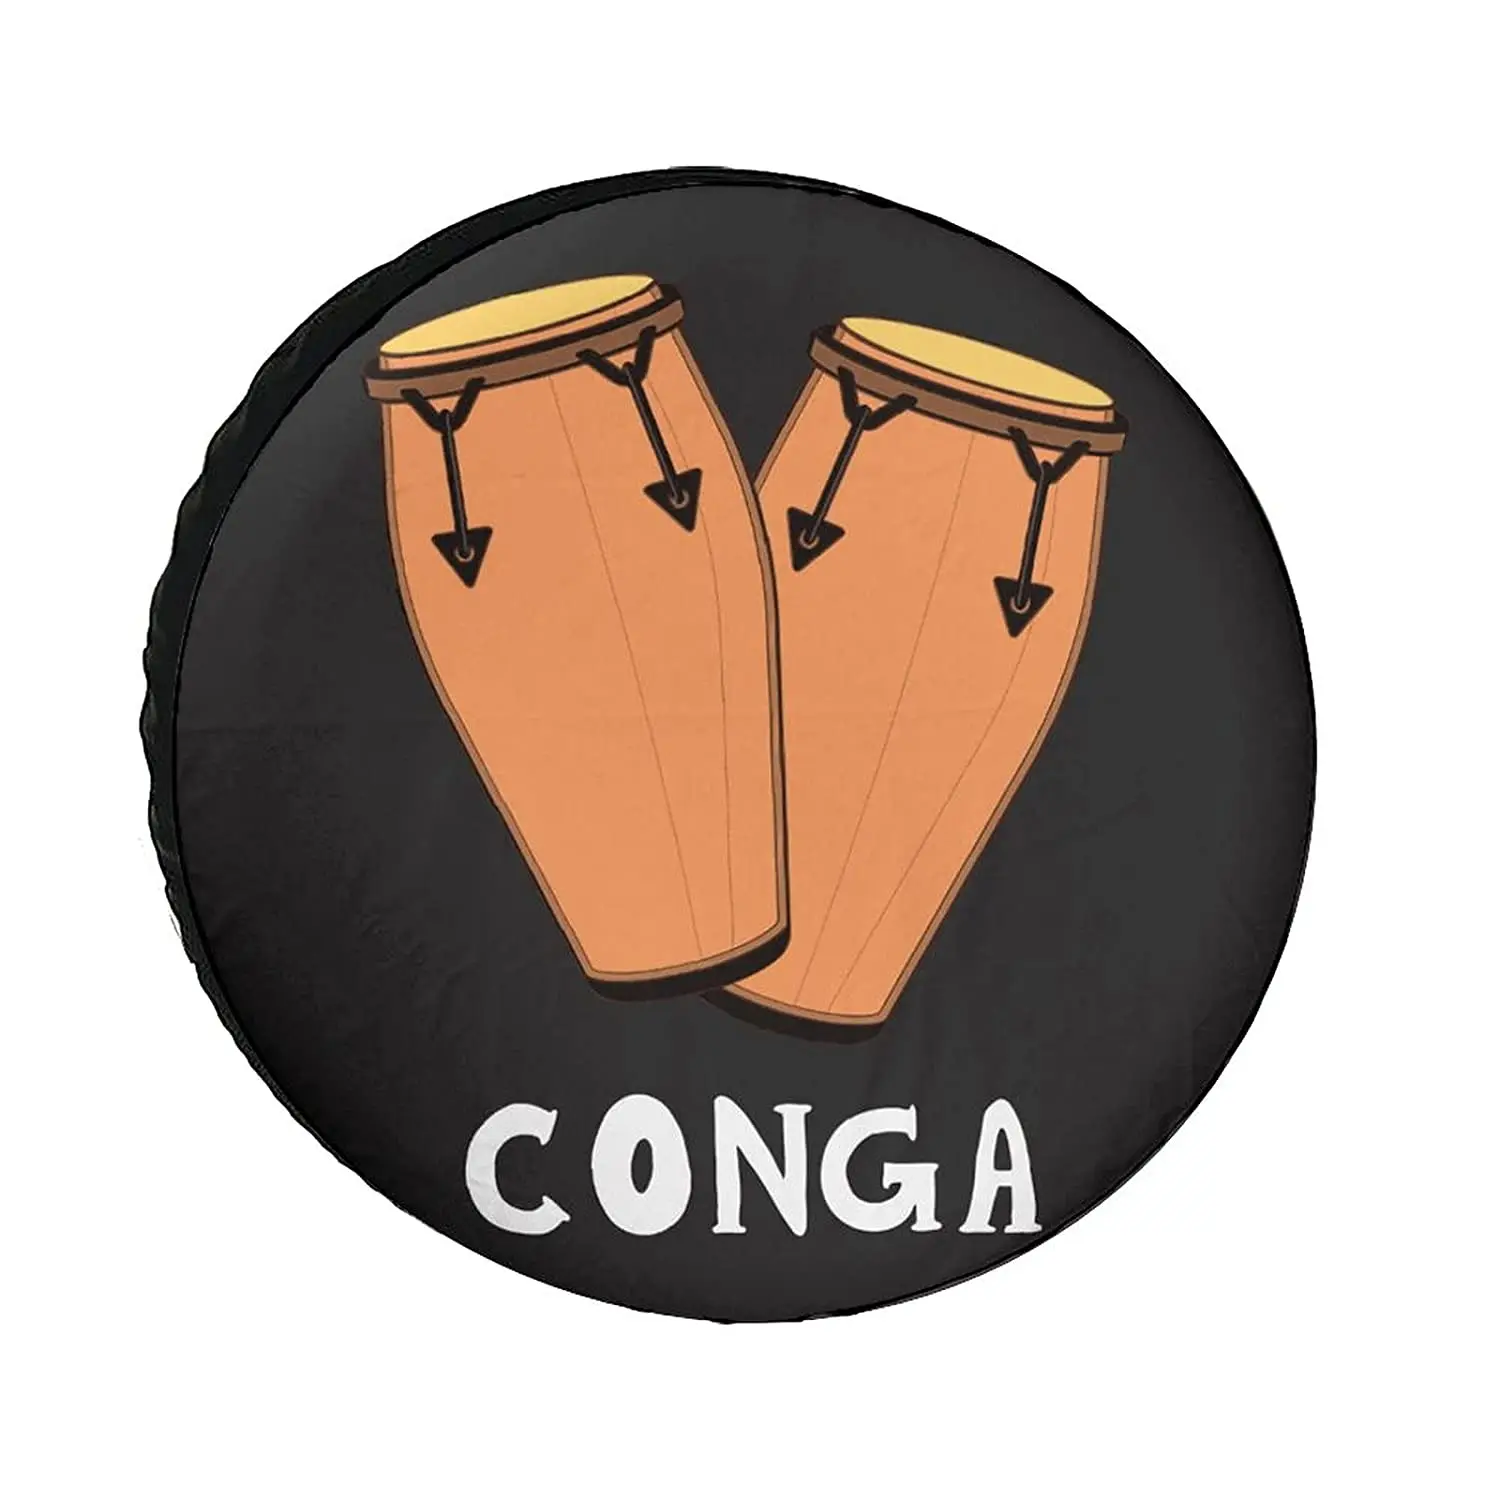 

Conga Cool Drum Universe Exploration Tire Covers Wheel Cover Protectors Weatherproof UV Protection